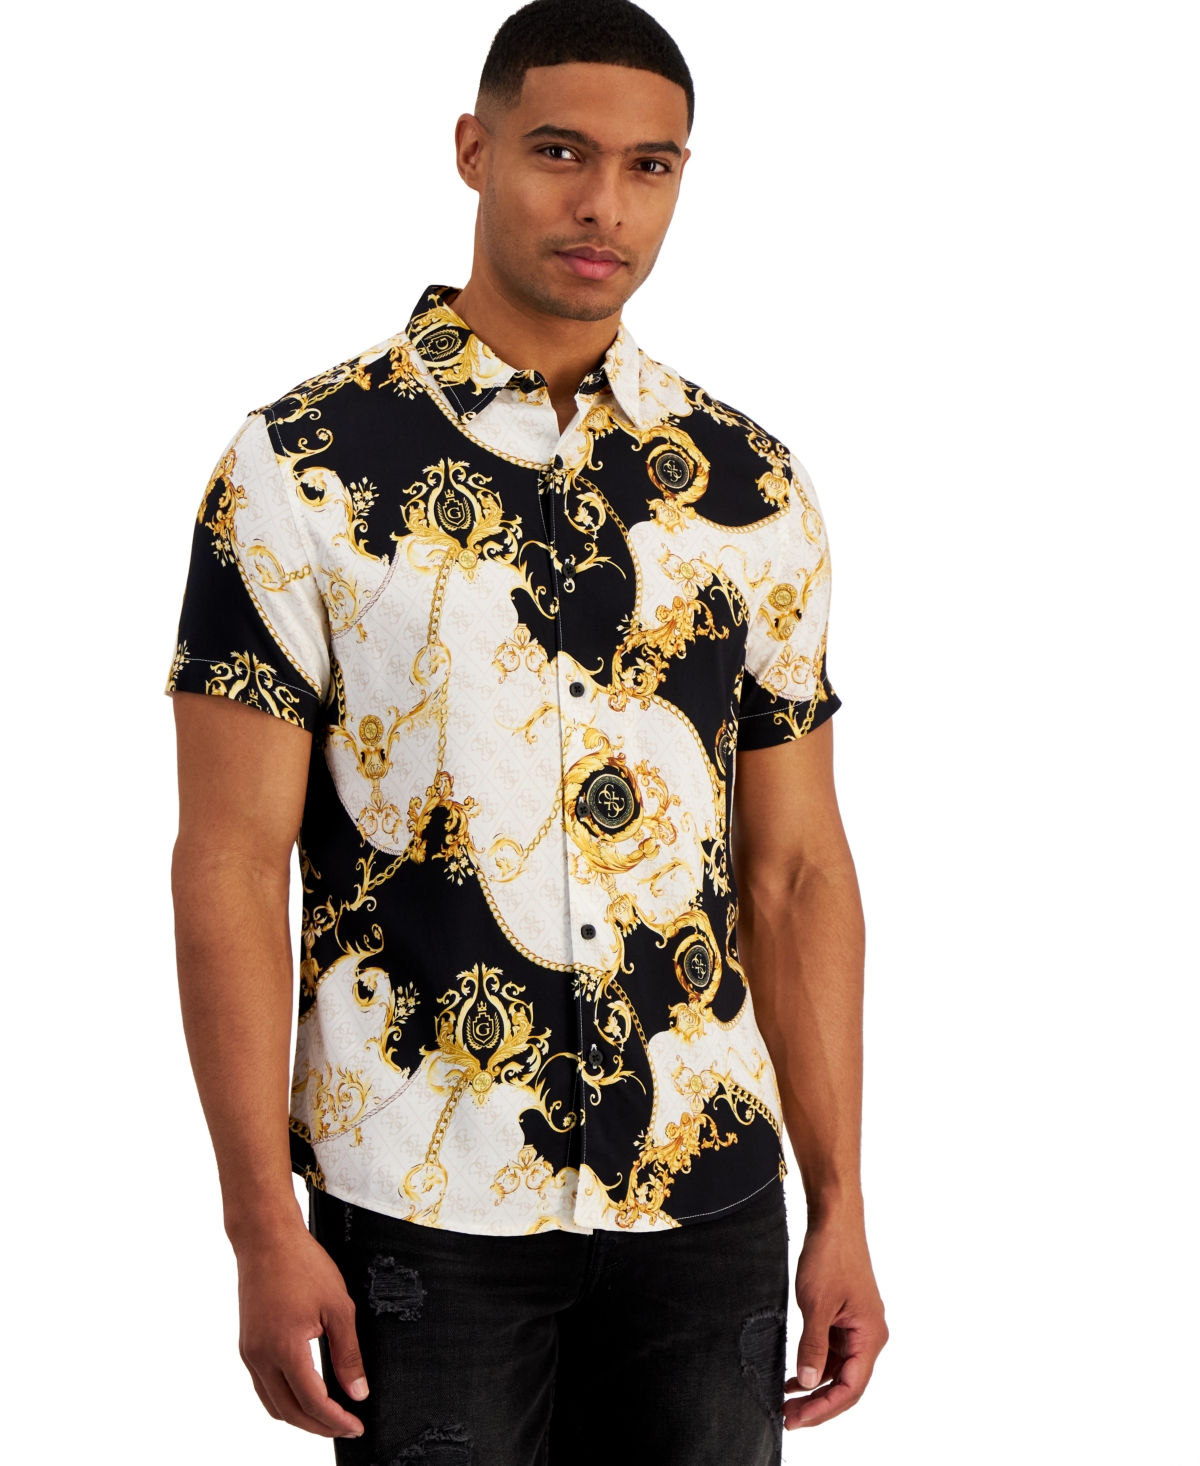 Guess Men's Gold Chains Graphic Shirt